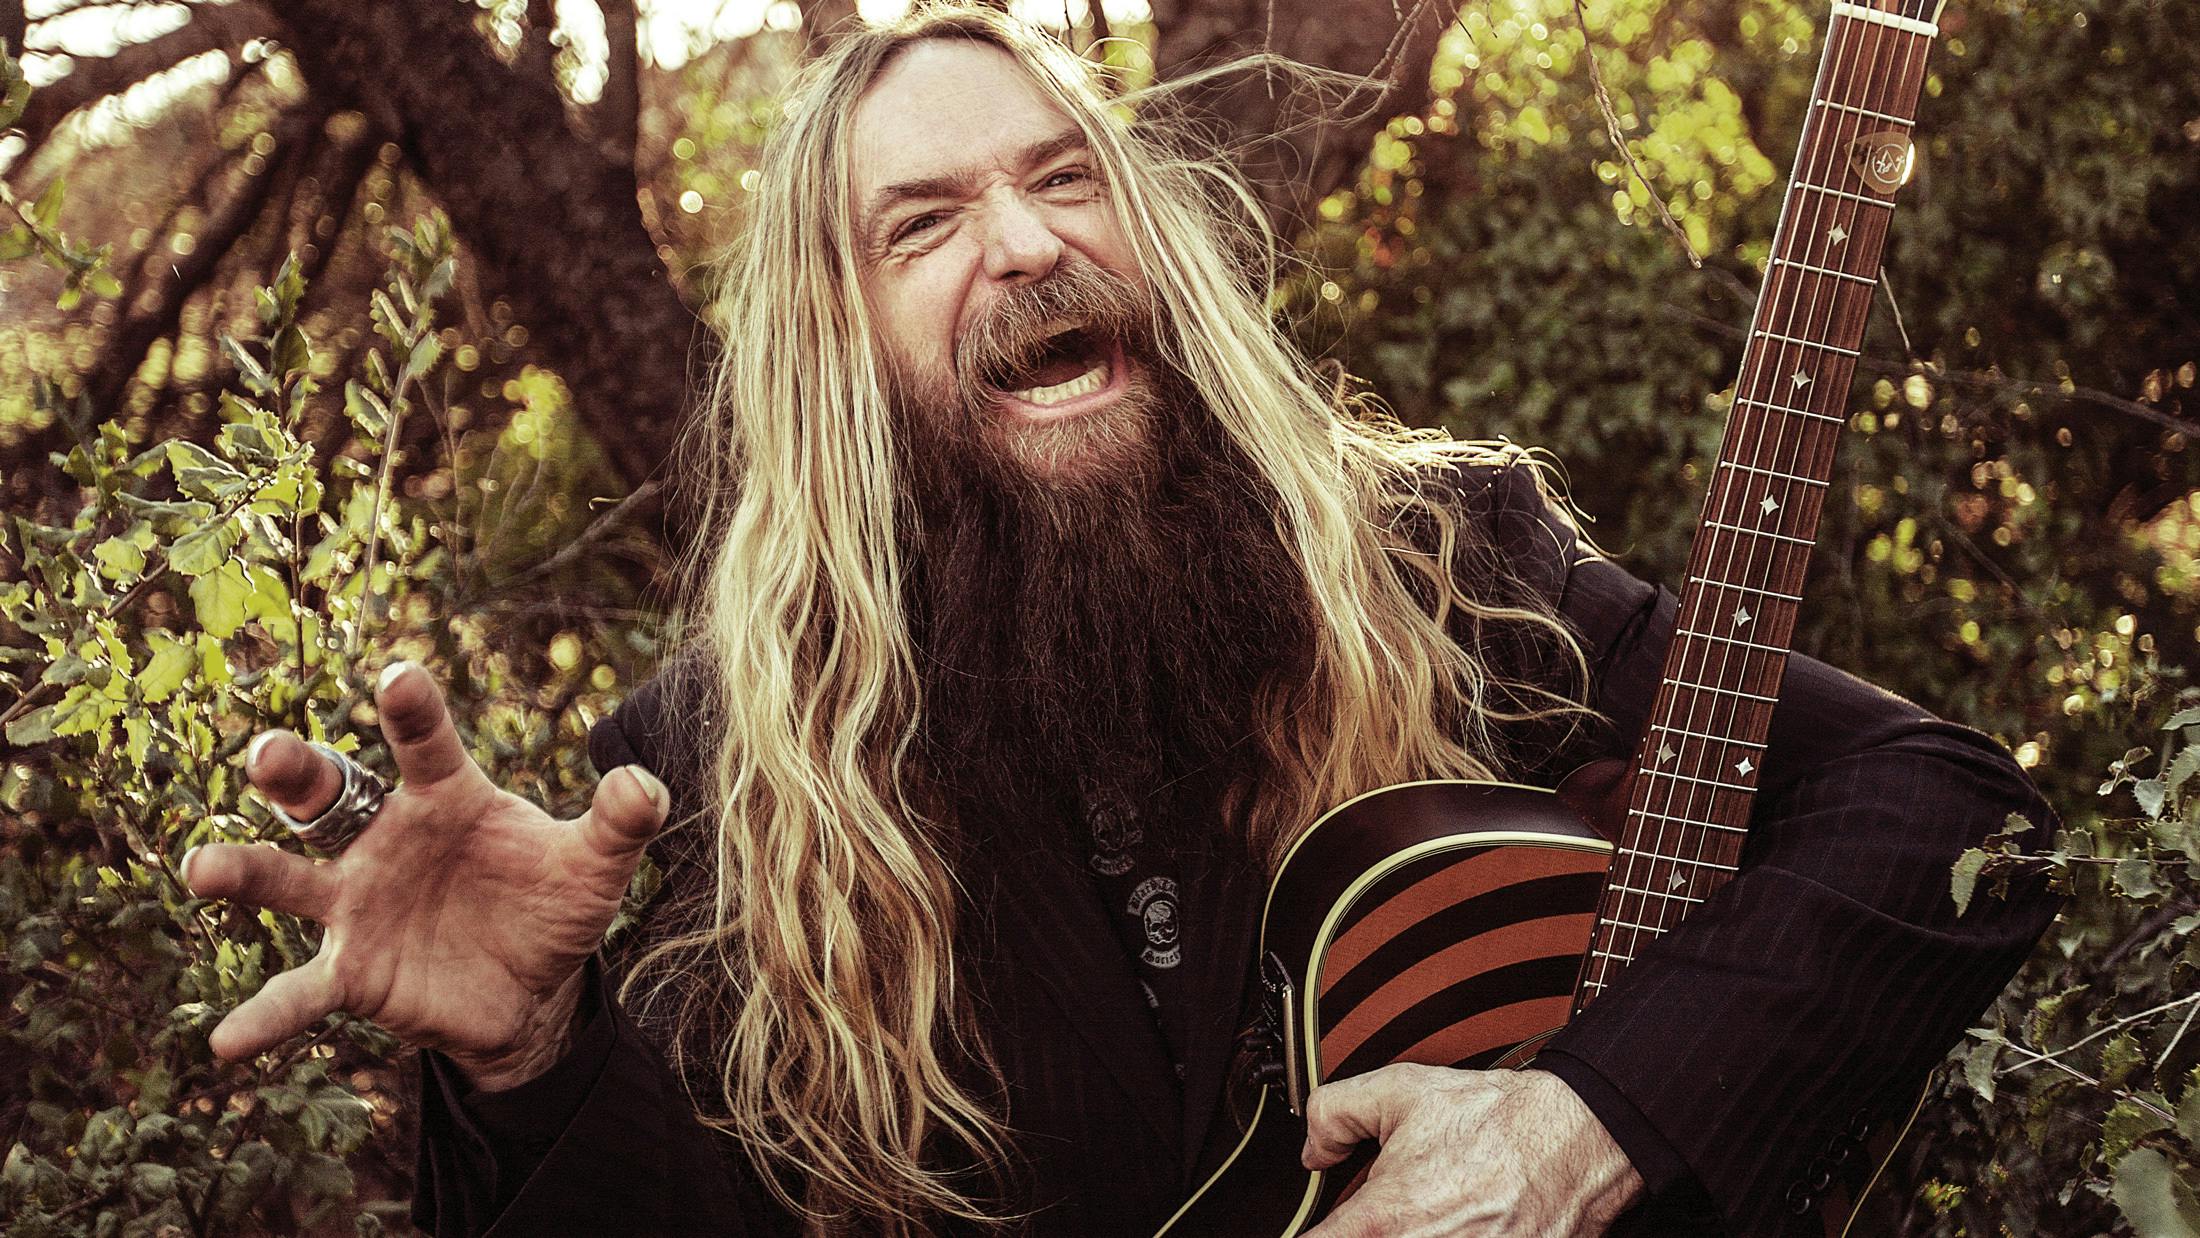 Zakk Wylde: “Ozzy said, ‘Look at this kid, he must really love Randy Rhoads…’ I sh*t my pants and he said, ‘Change your pants, then we’ll play’”